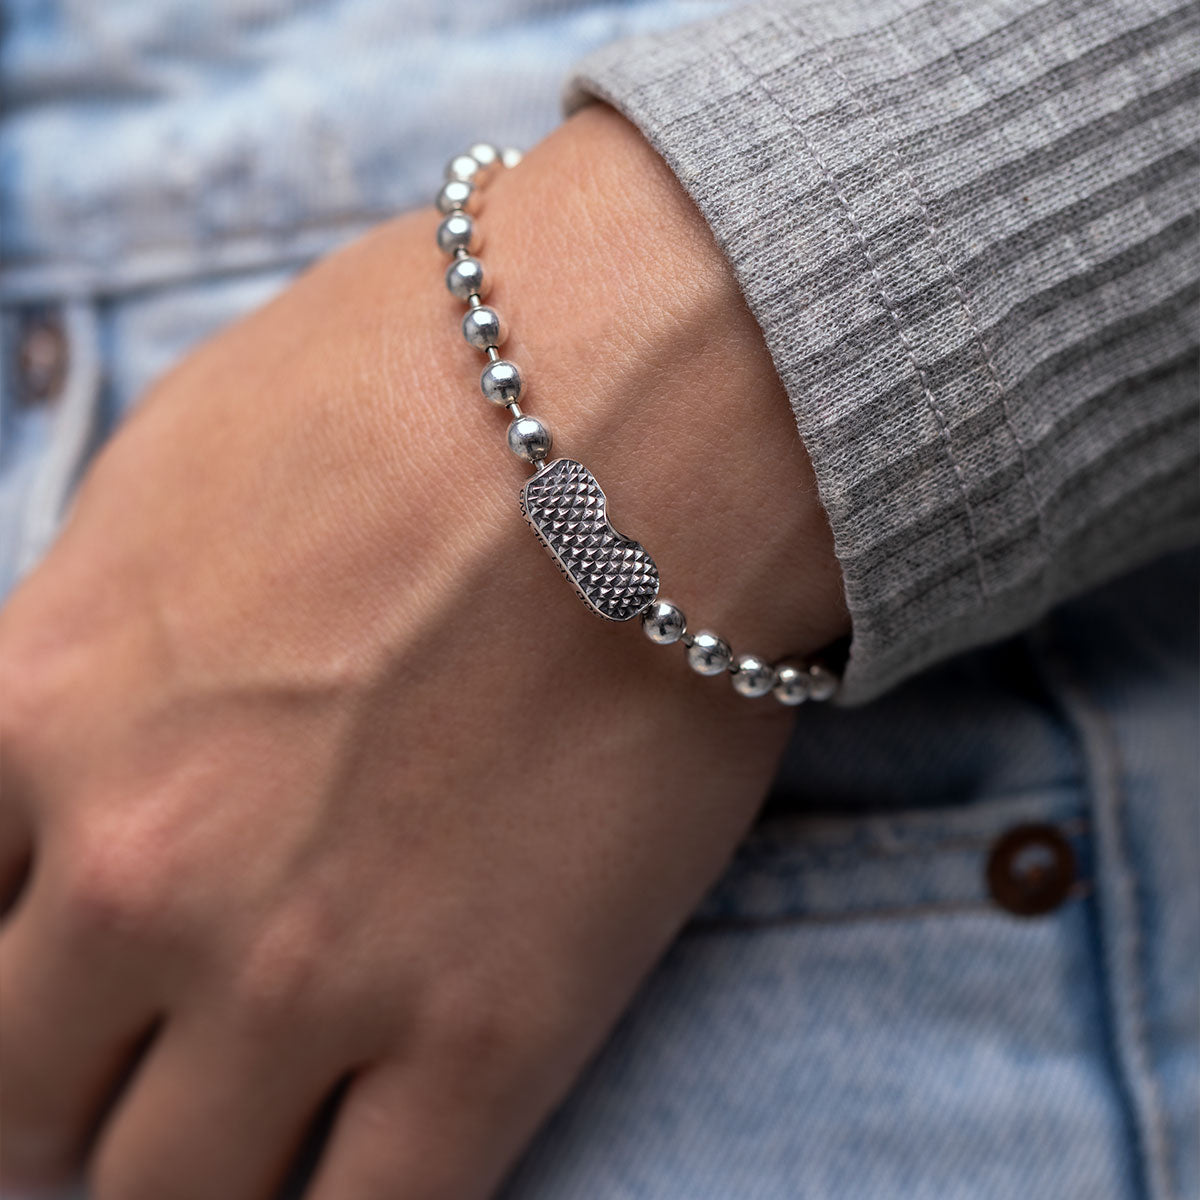 Buy Stainless Steel Ball Chain Bracelet, Hypo Allergenic Jewelry, 201 Steel  4mm Beaded Fashion Bracelet, Men's Bracelet, Women's Bracelet Online in  India - Etsy